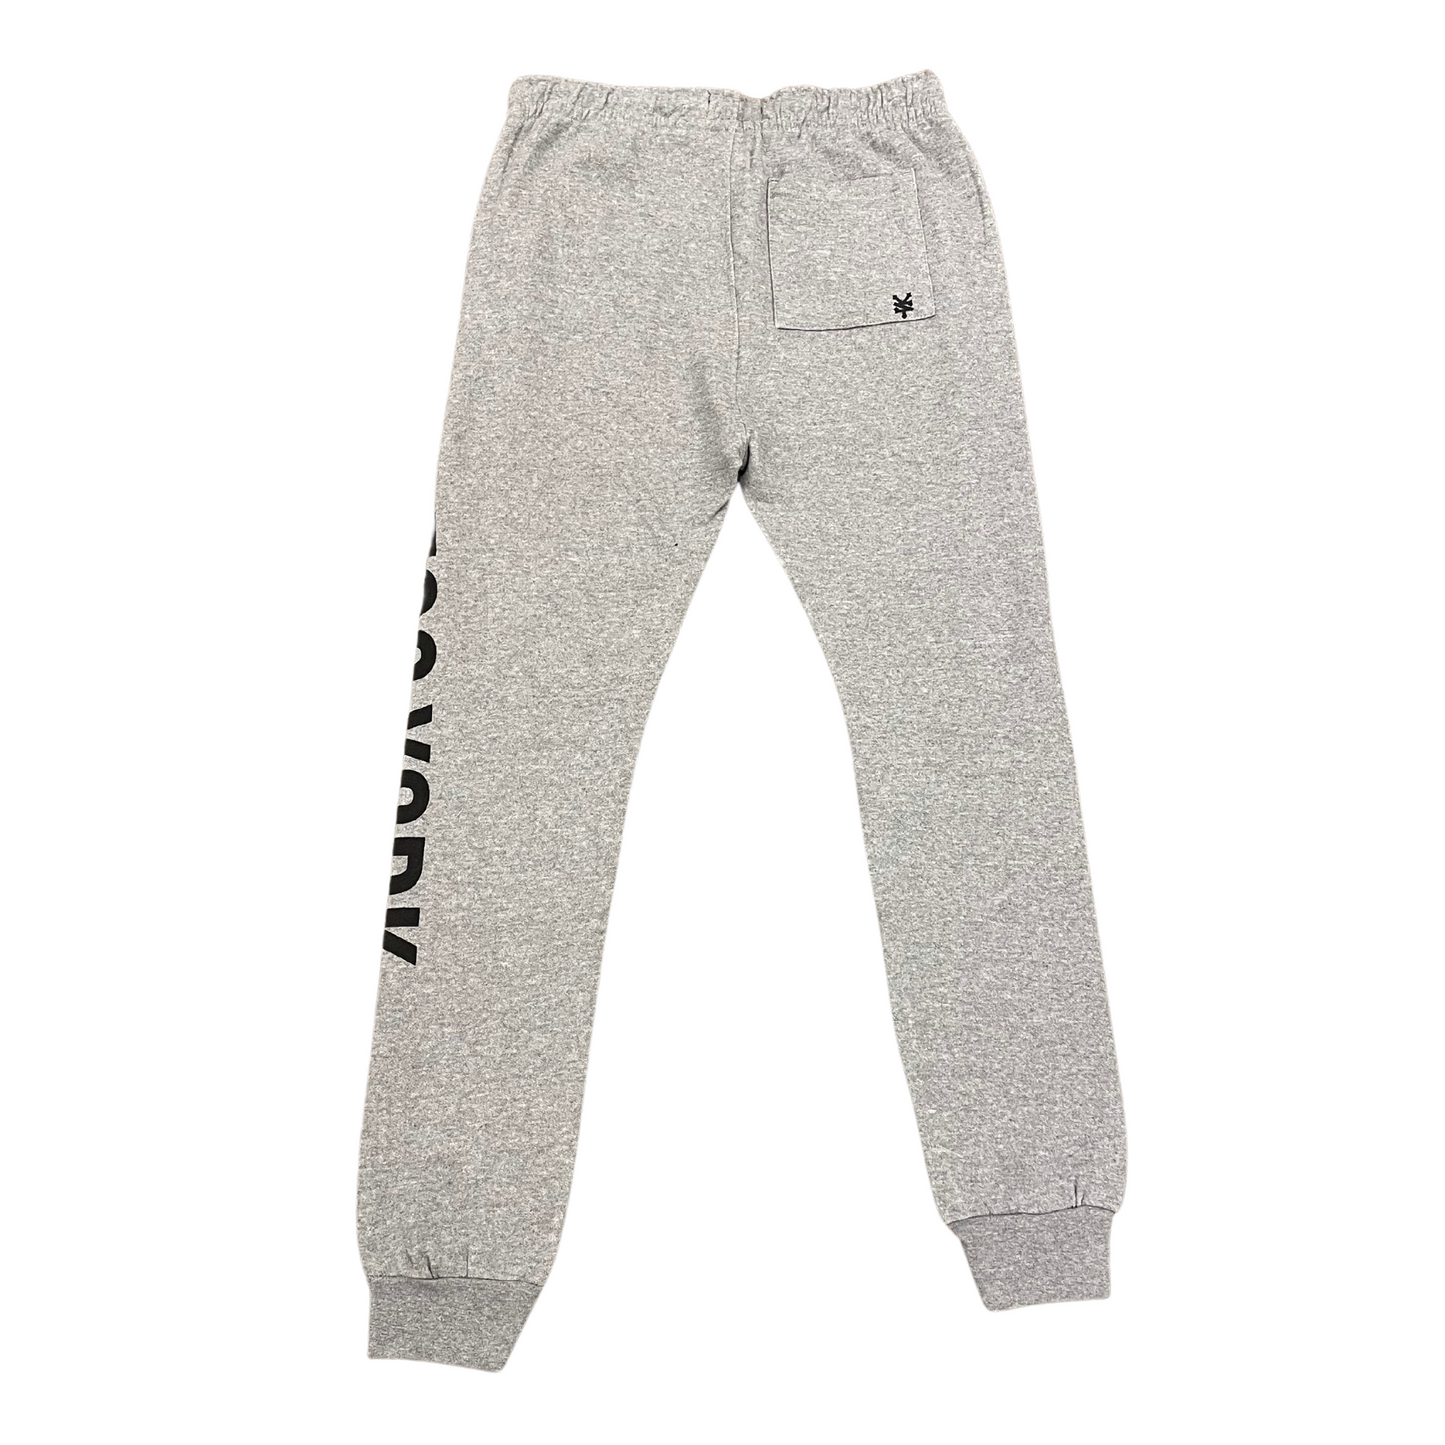 Zoo York Sweat Pants Jogger Heather or Charcoal Gray (S-2XL)